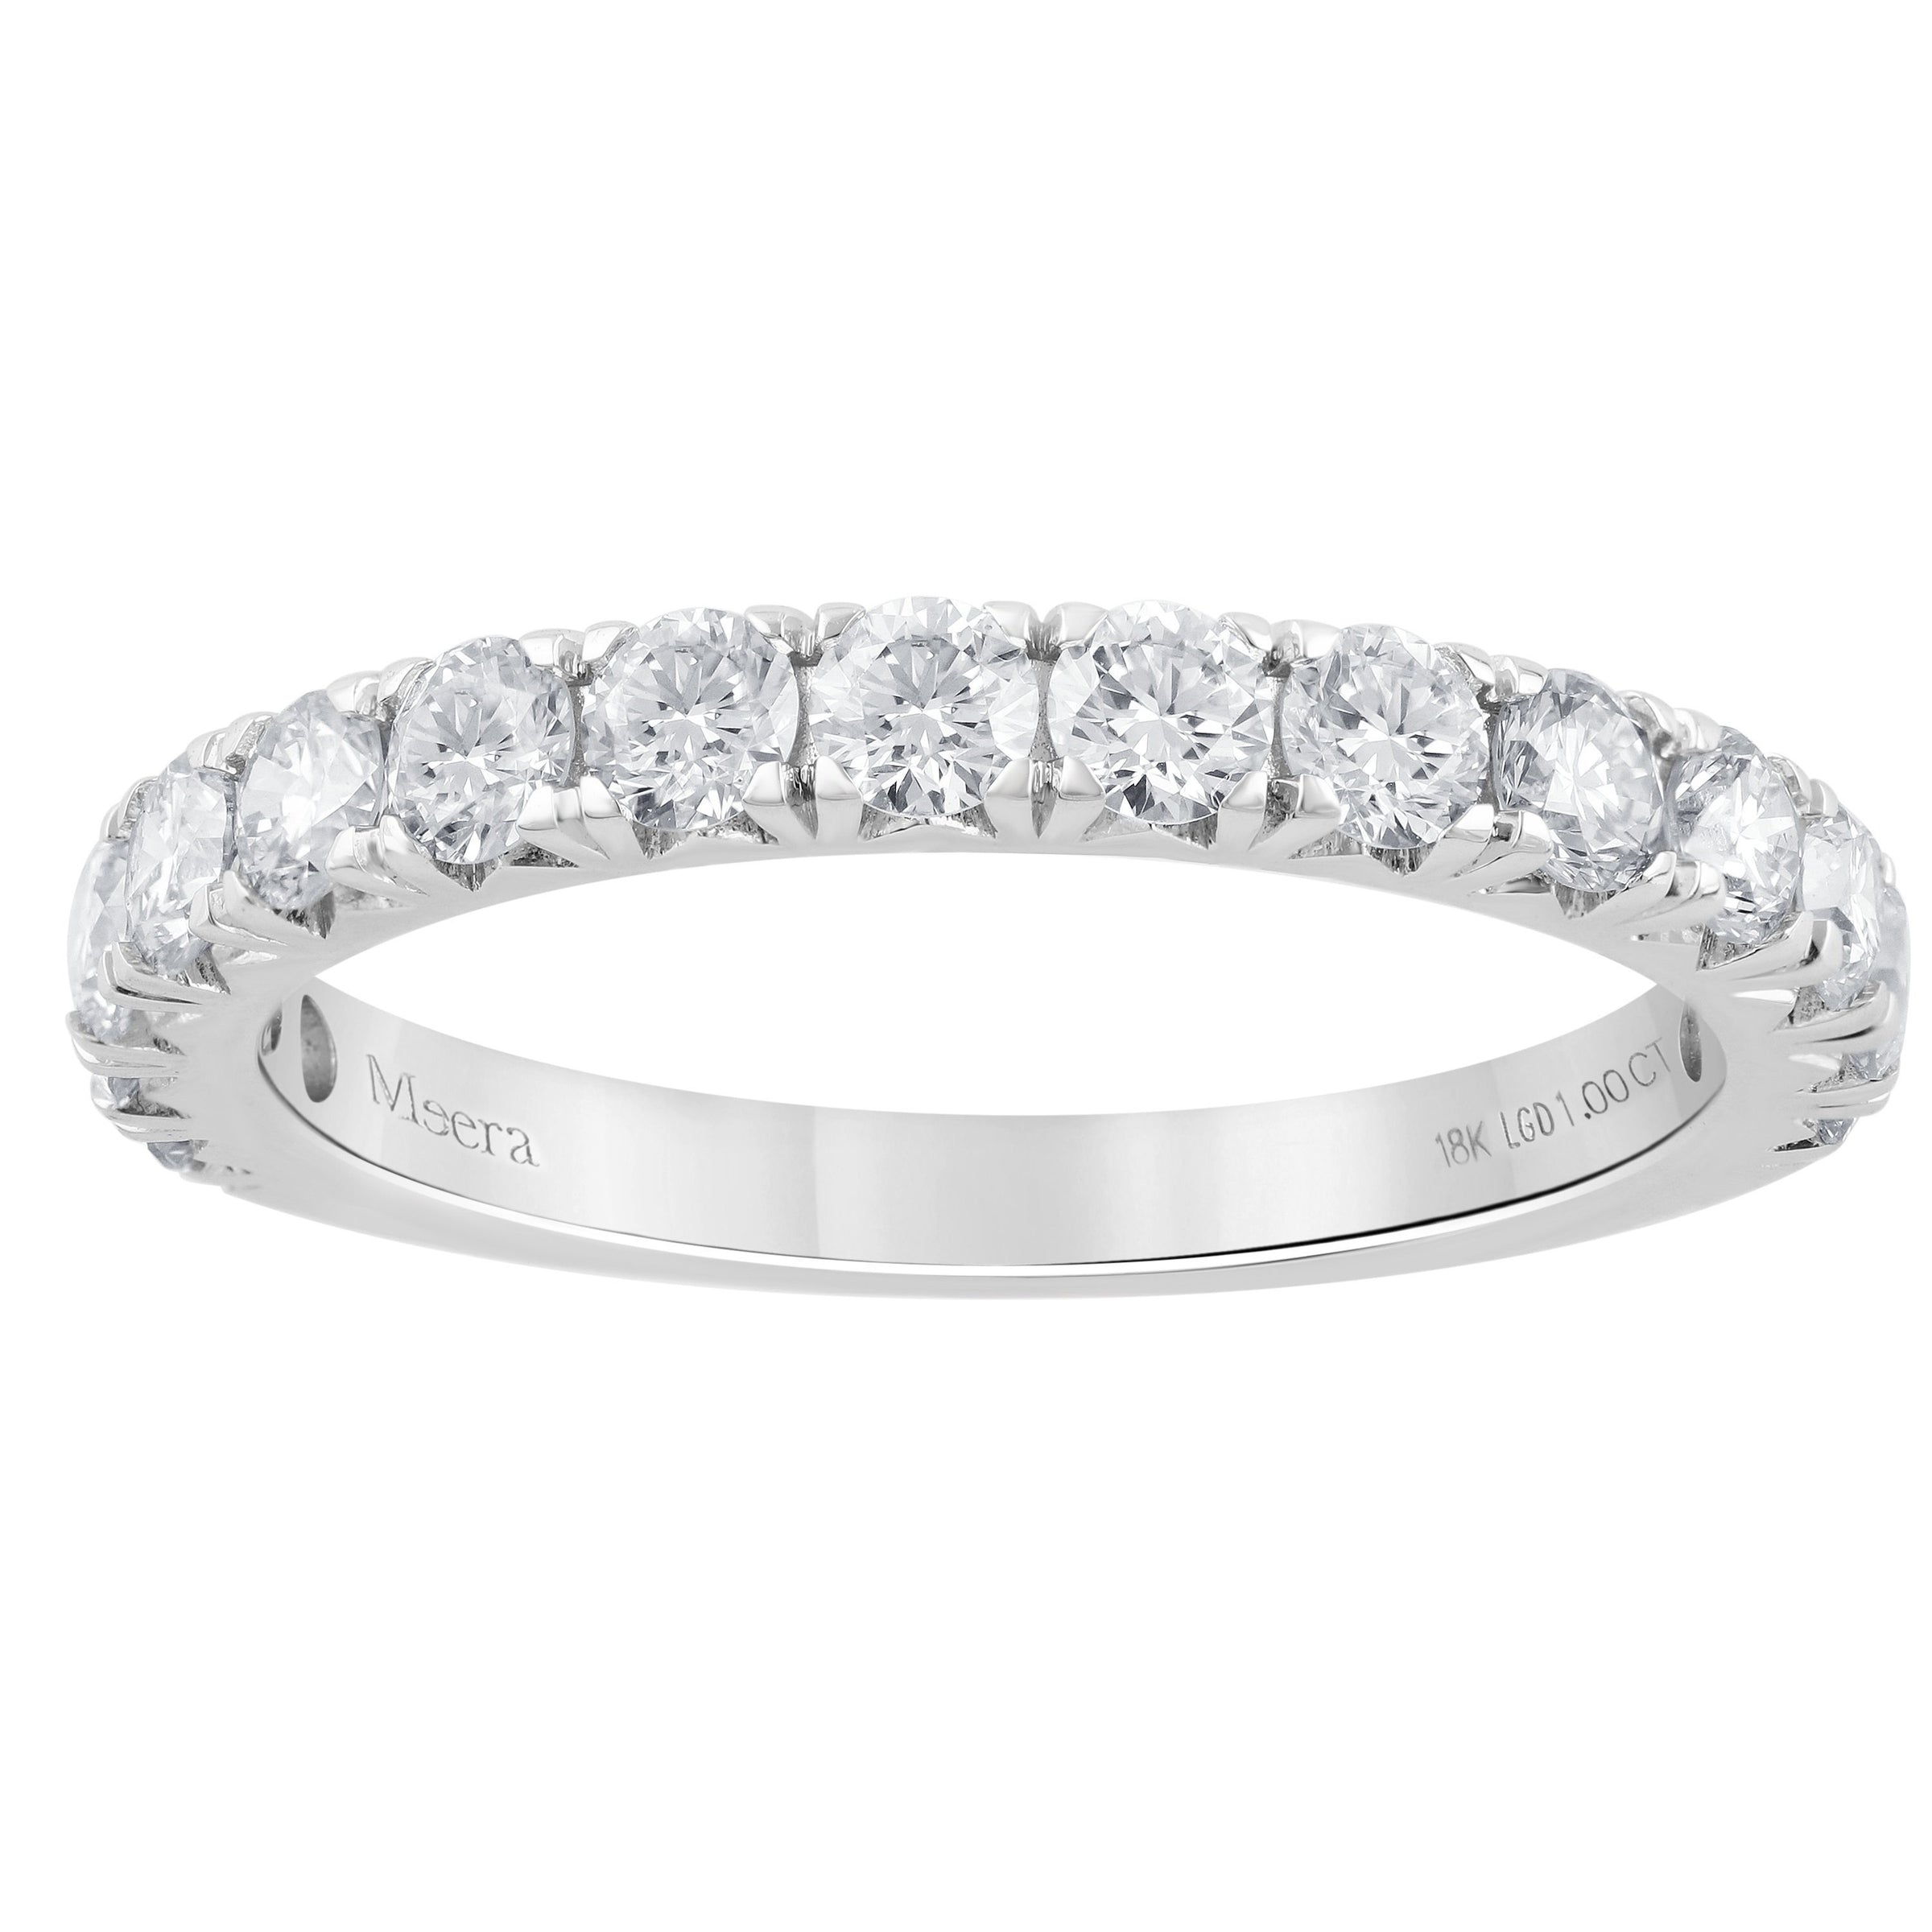 Meera Eternity Ring with 1.00ct of Laboratory Grown Diamonds in 18ct White Gold Rings Meera 